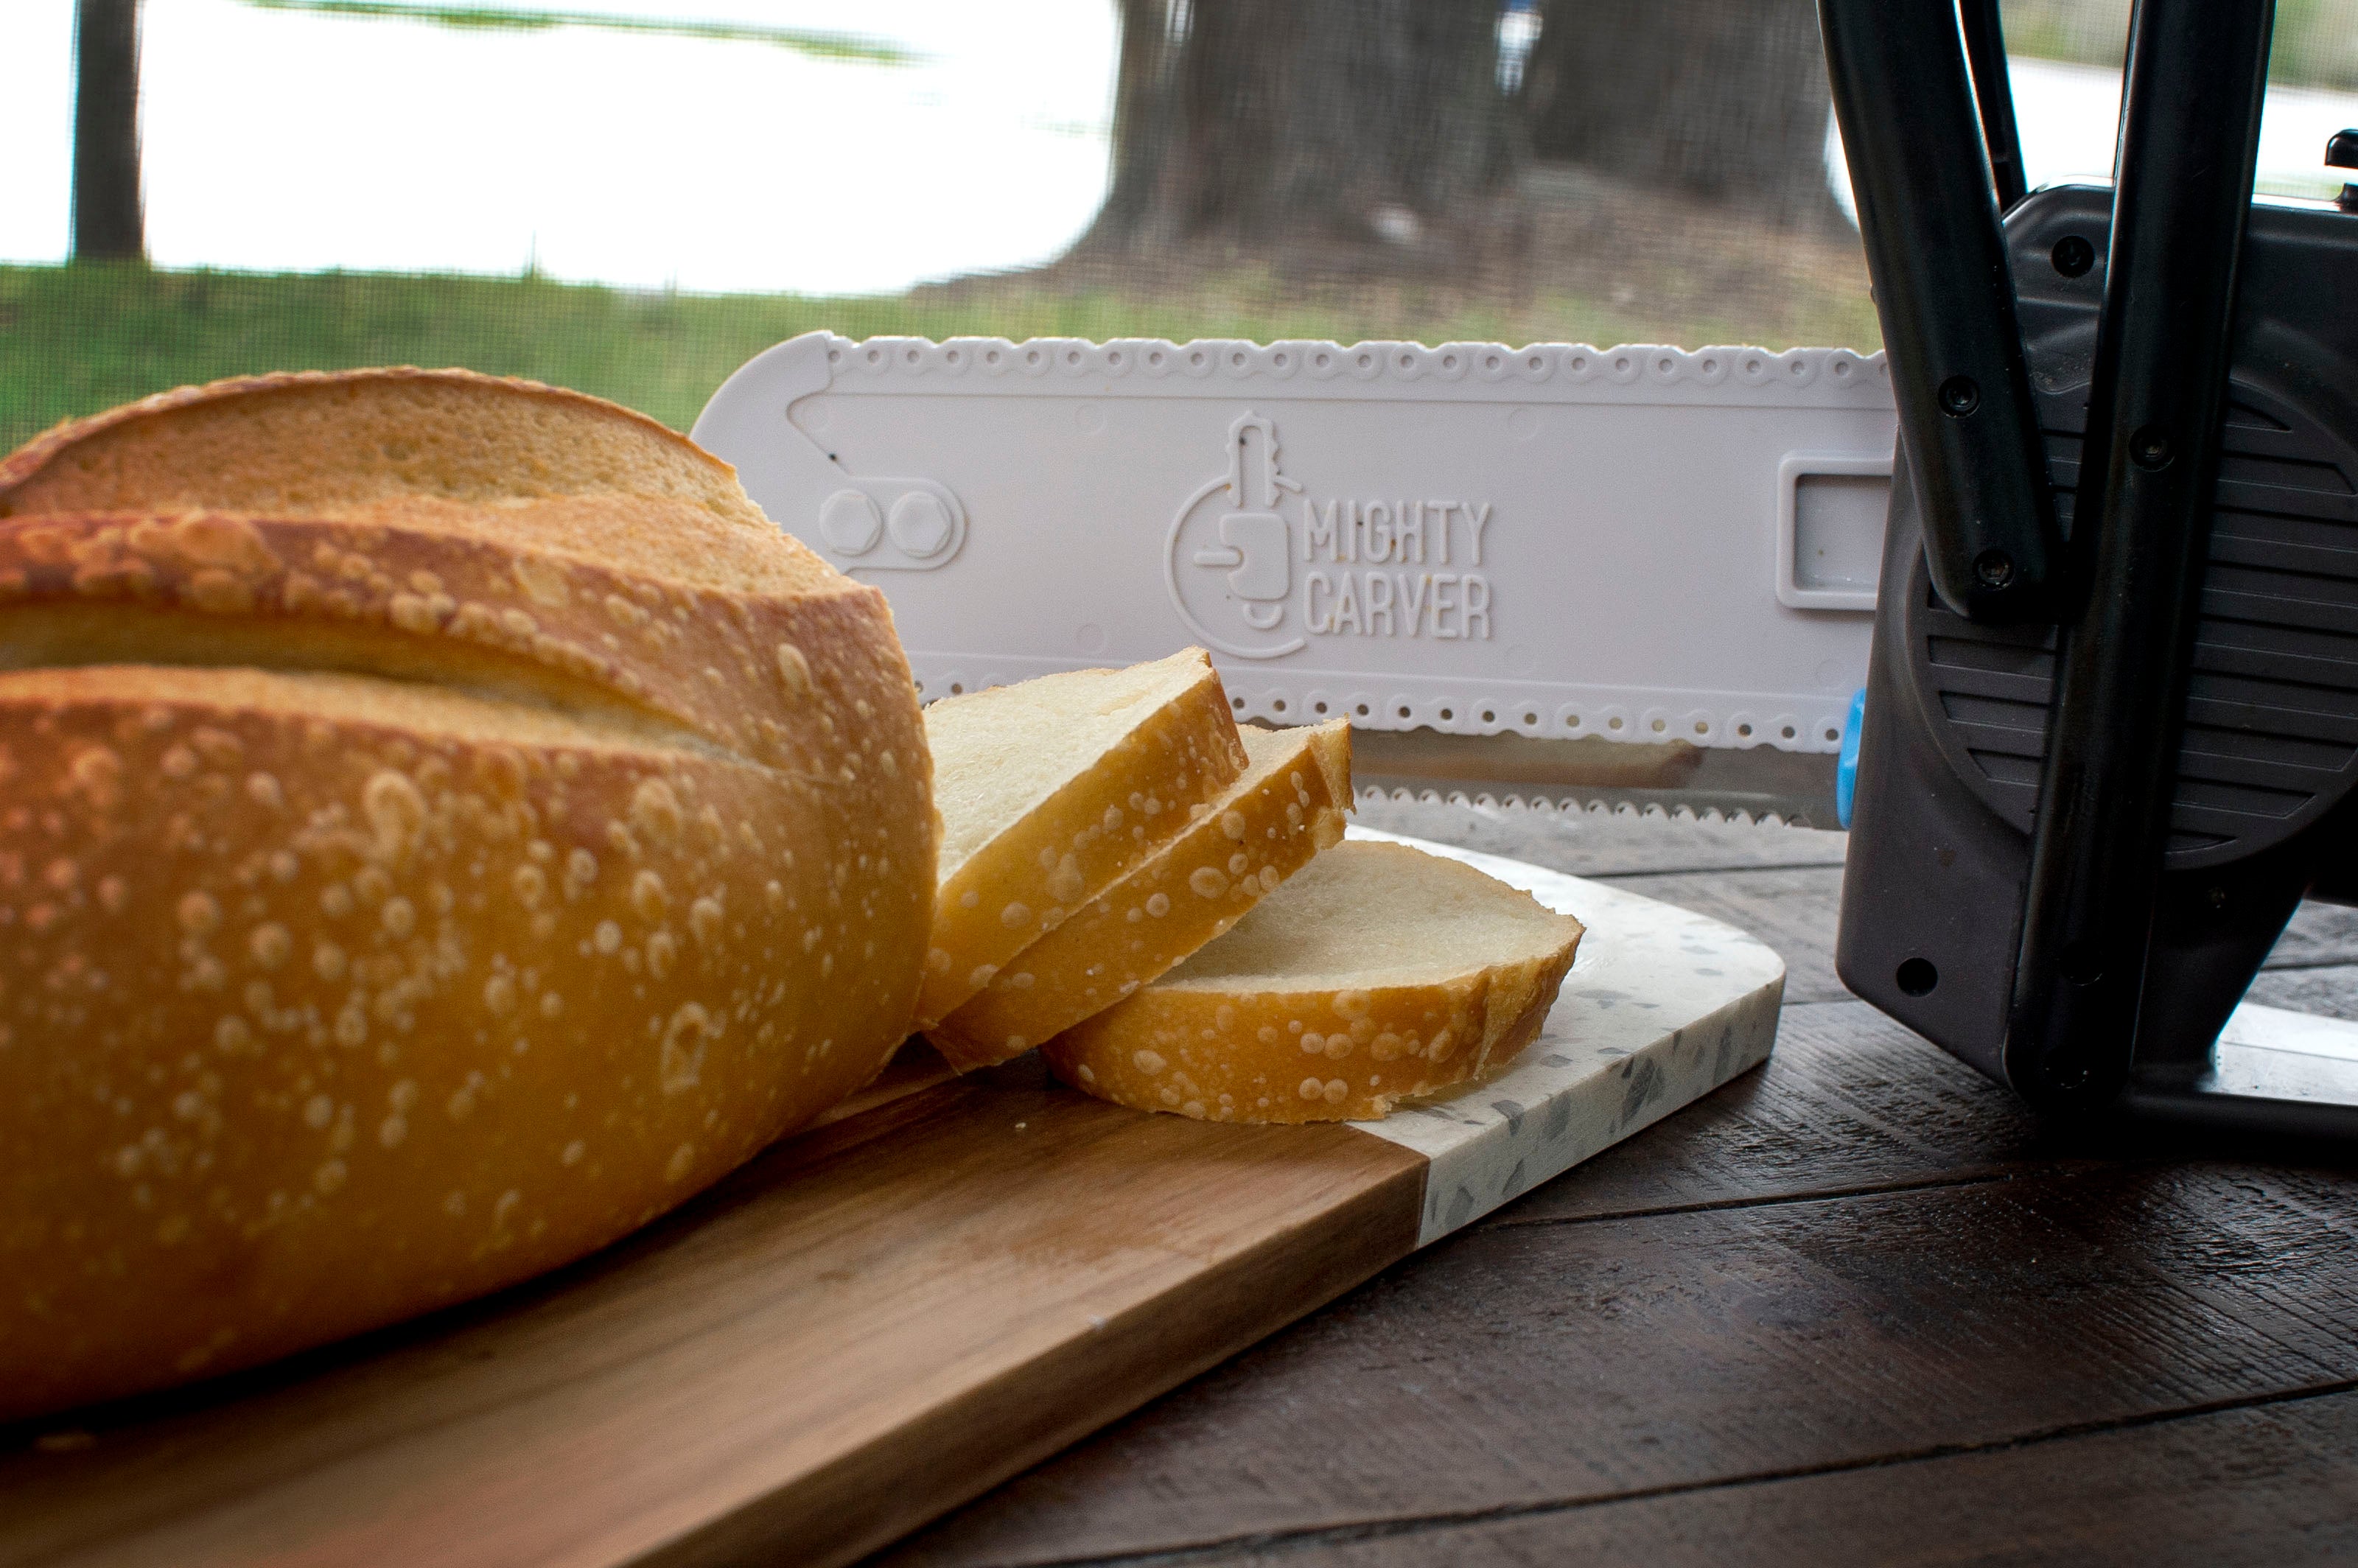 MIGHTY CARVER Electric Carving Knife, As Seen On Shark Tank